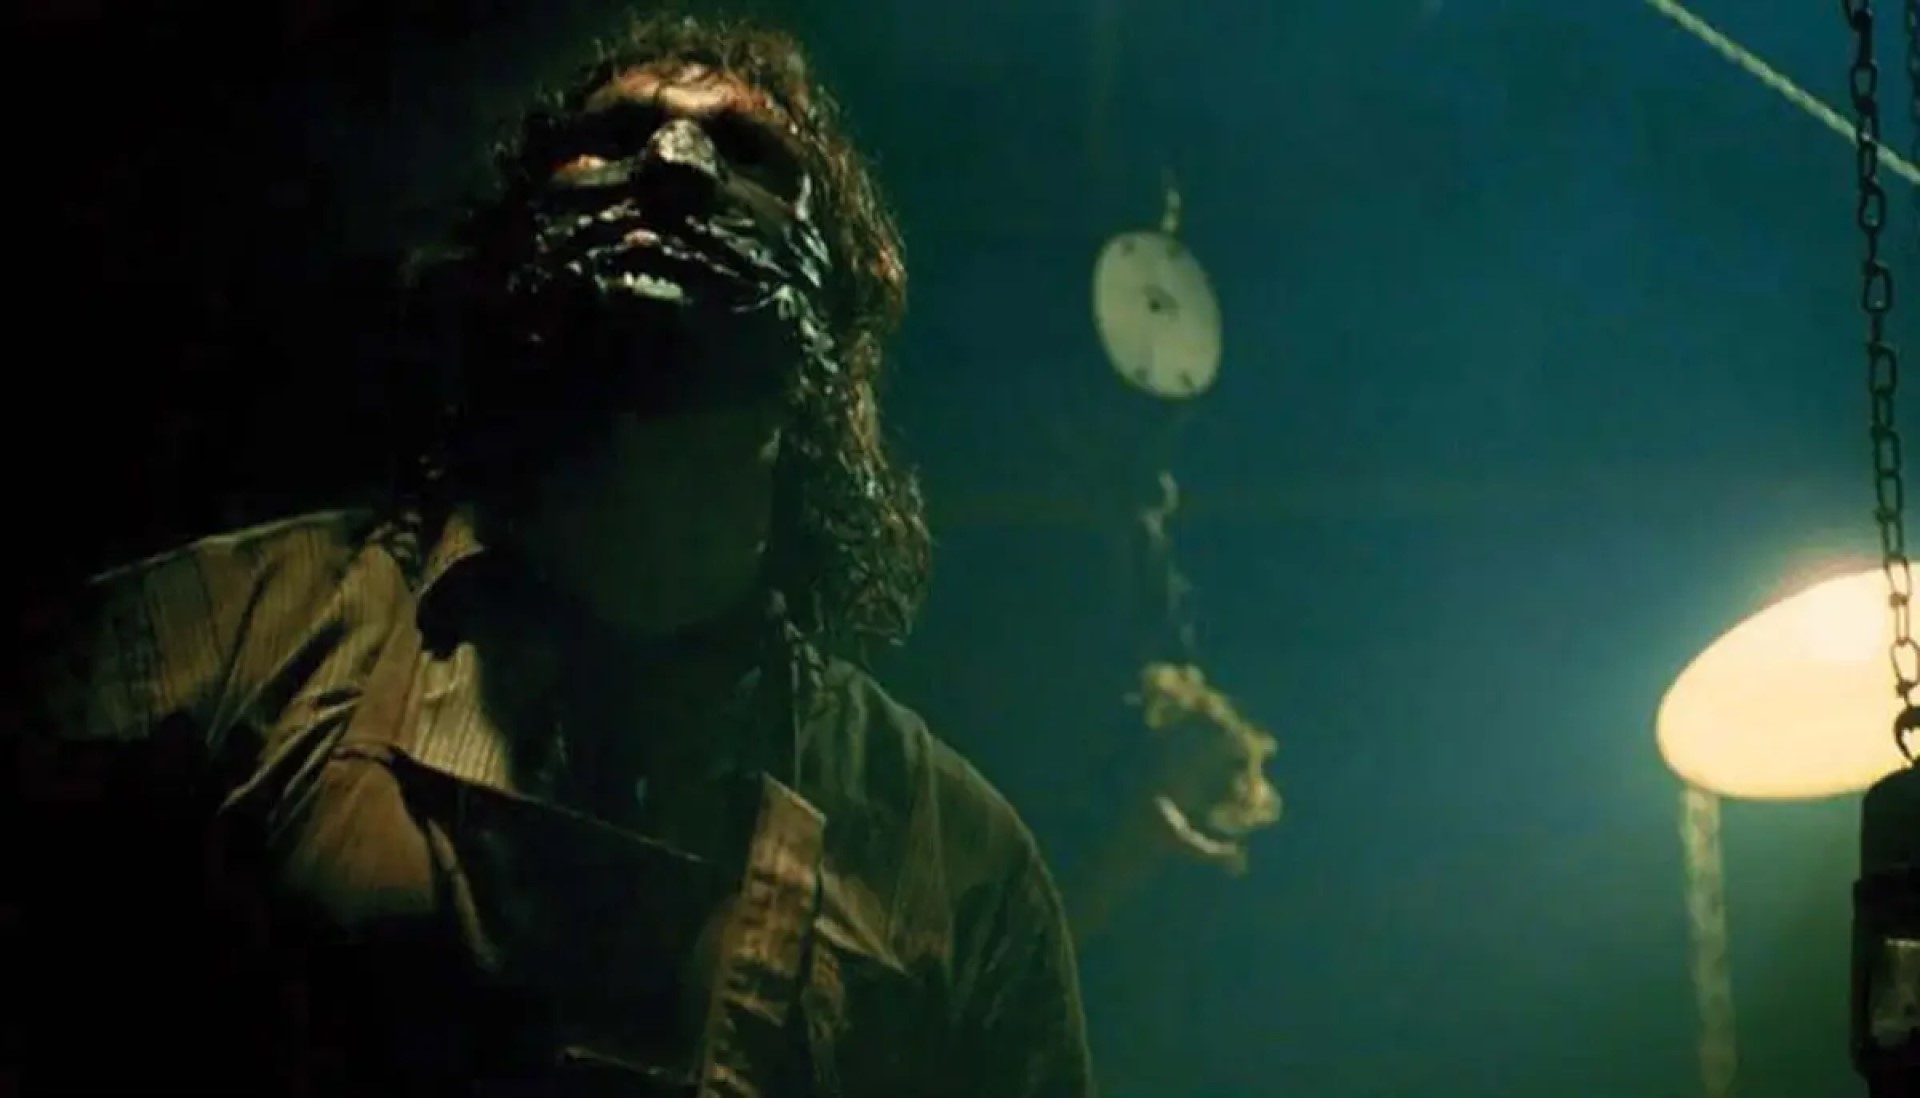 Leatherface / The Texas Chainsaw Massacre